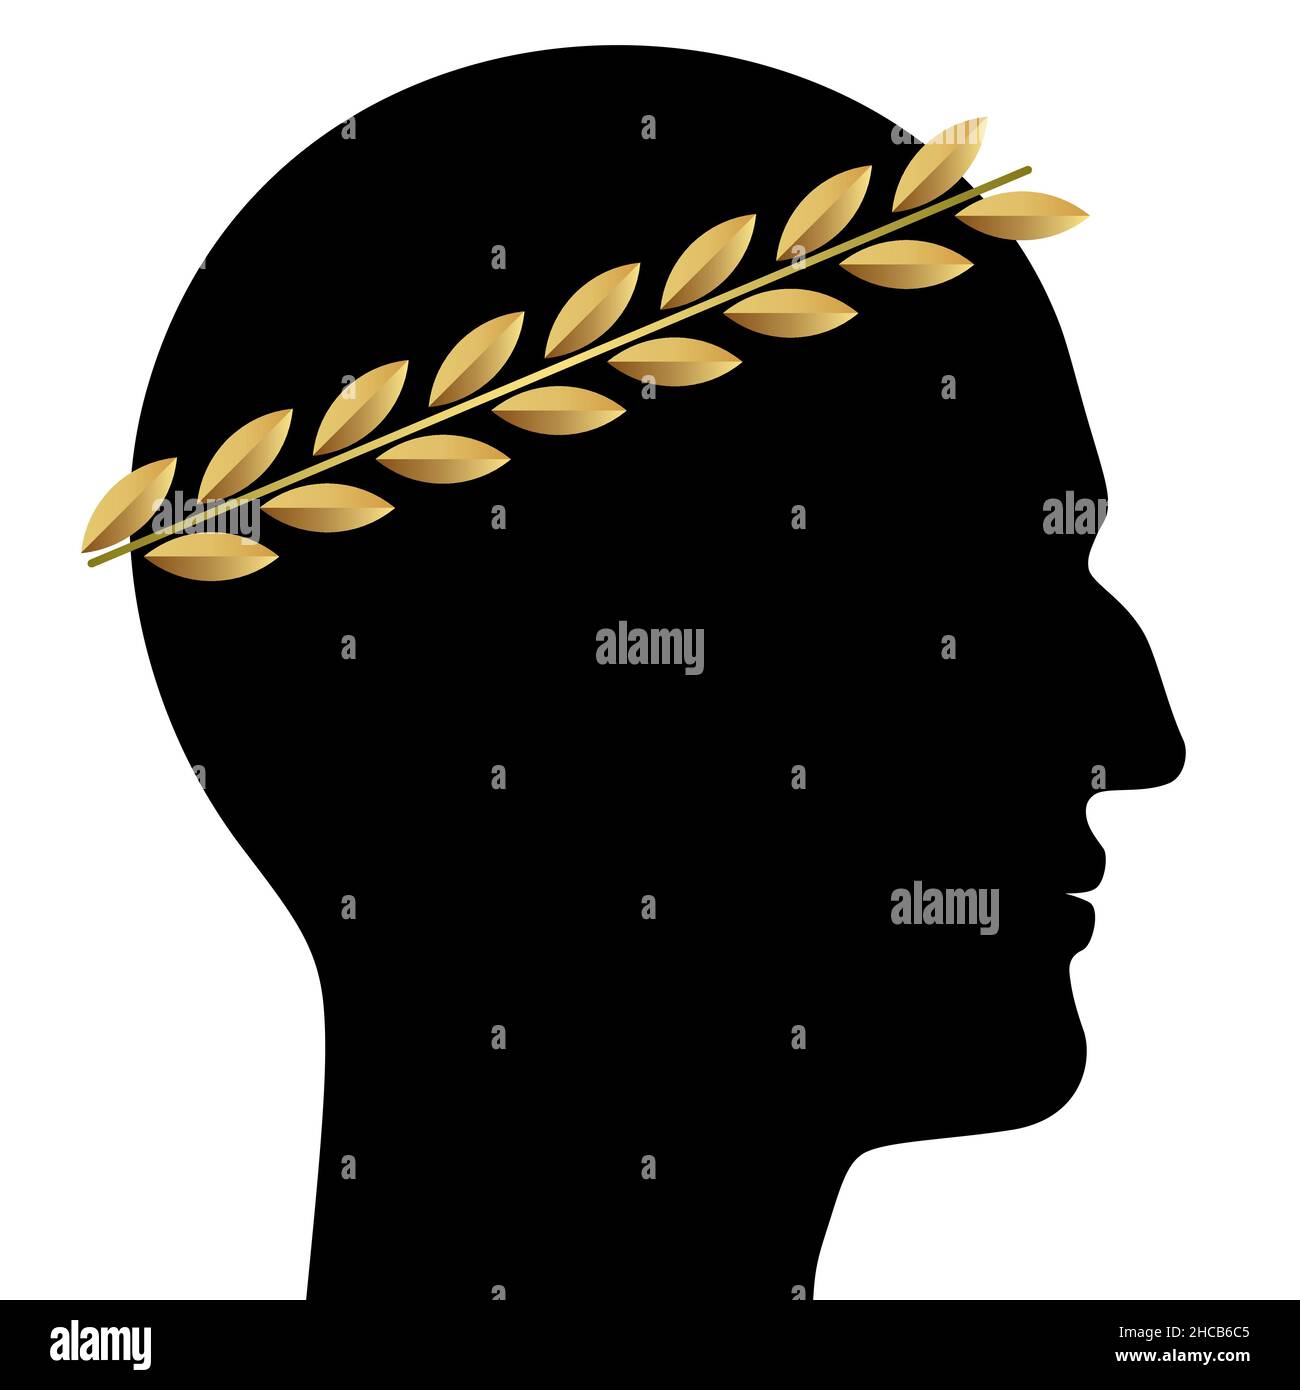 Black silhouette portrait of a leader or winner man, with golden laurel crown, isolated on white background. Ancient Greece or Roman emperor, caesar, ruler, or king vector portrait. Stock Vector